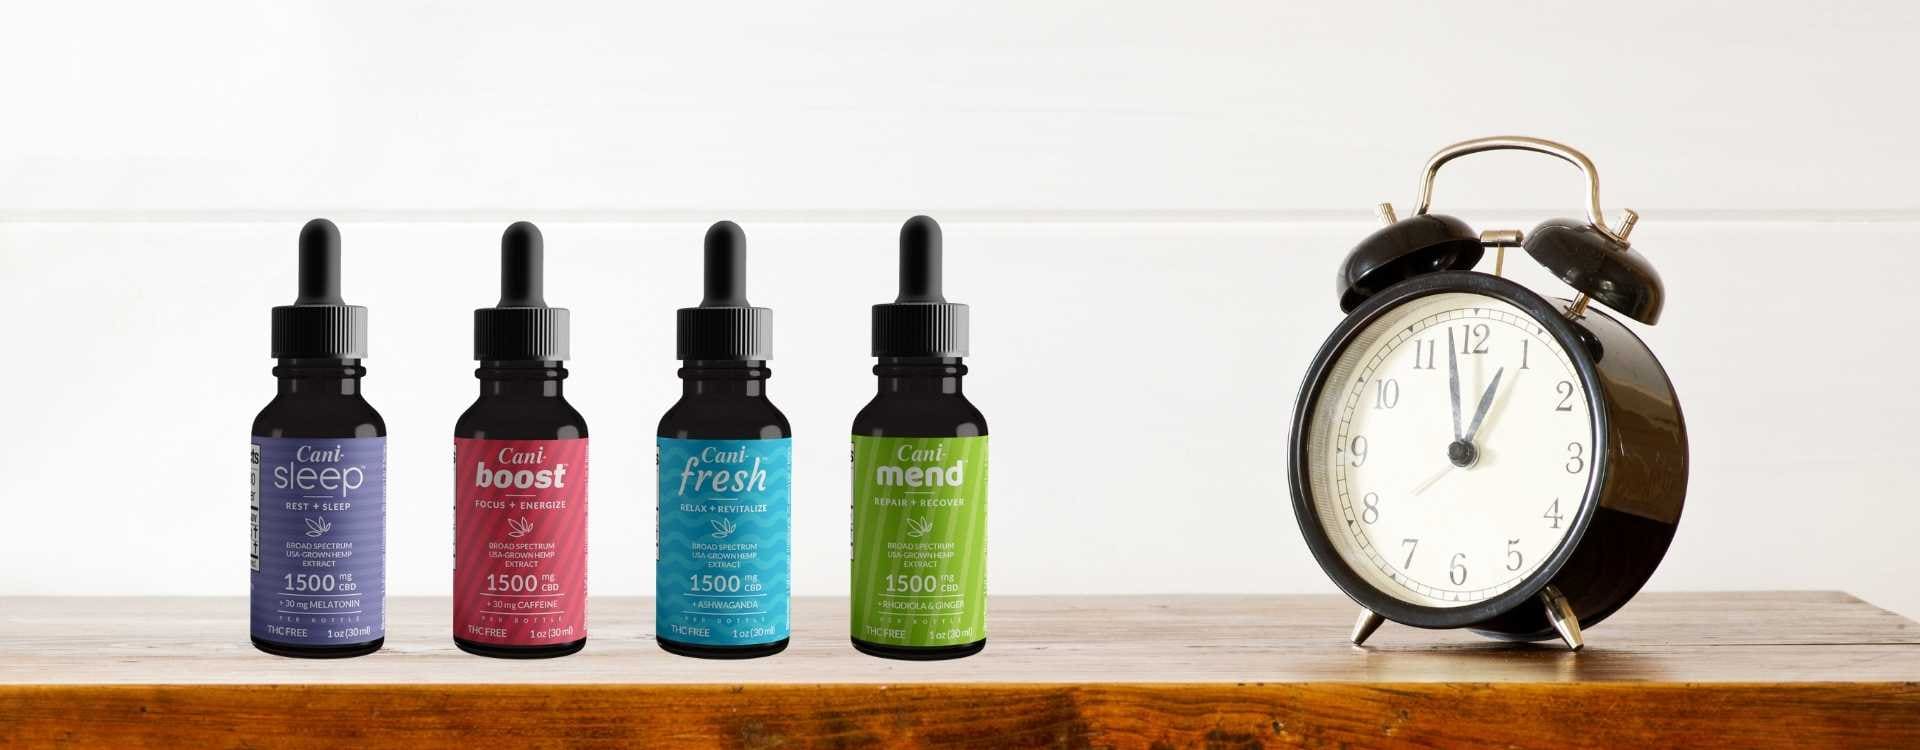 Alt=“Four CBD oil tinctures next to a black alarm clock placed on a wooden table”